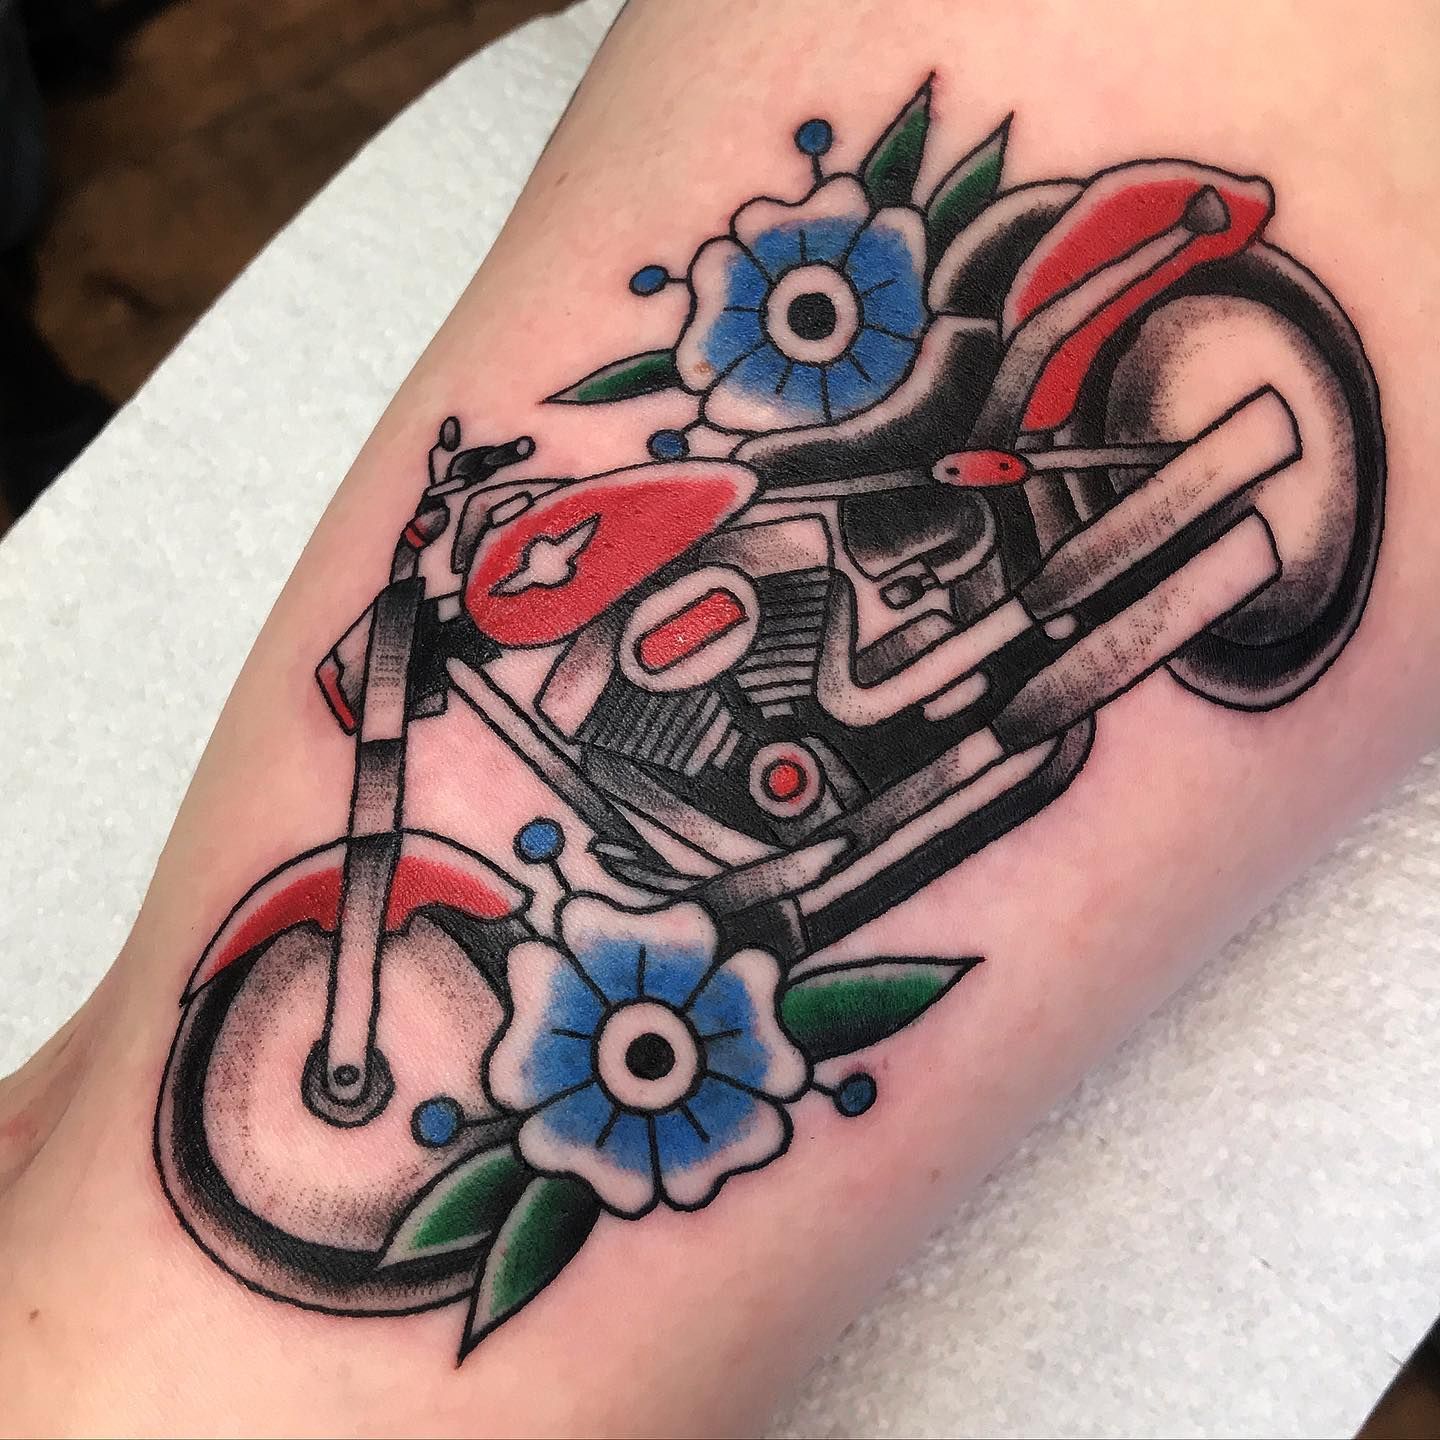 21 Excellent Bicycle Tattoo Ideas For Men  Styleoholic